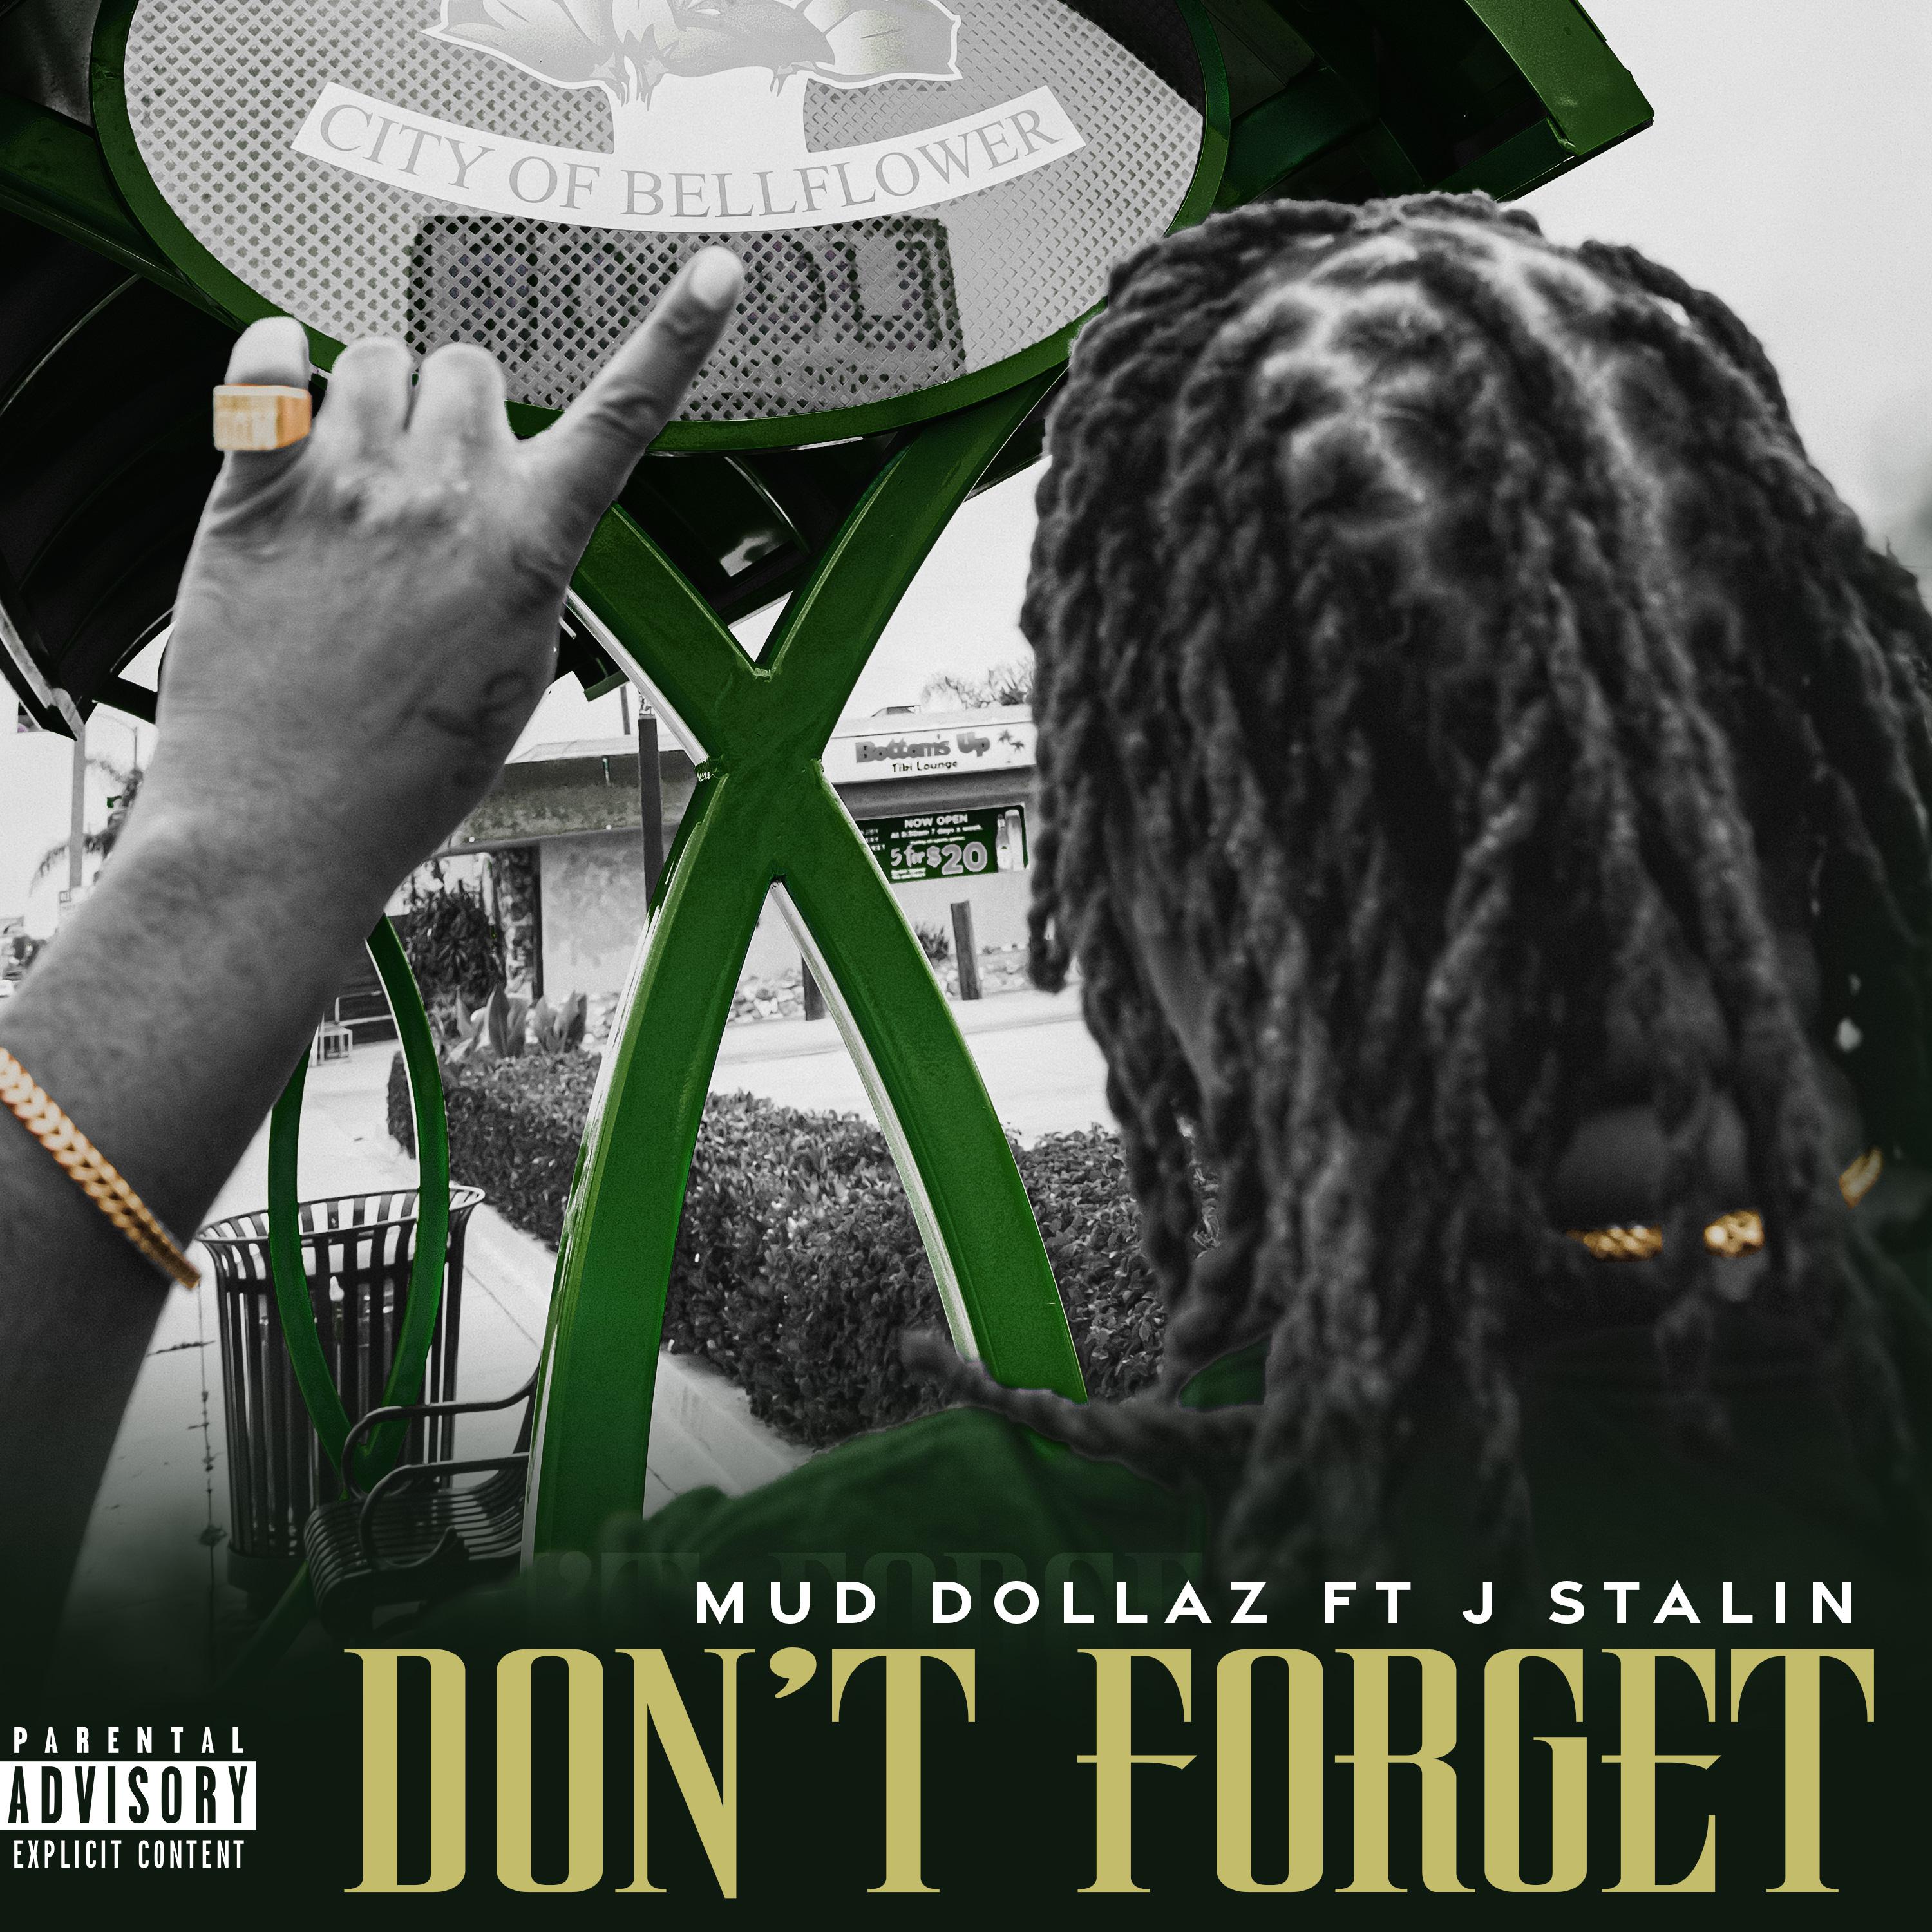 Mud Dollaz - Don't forget